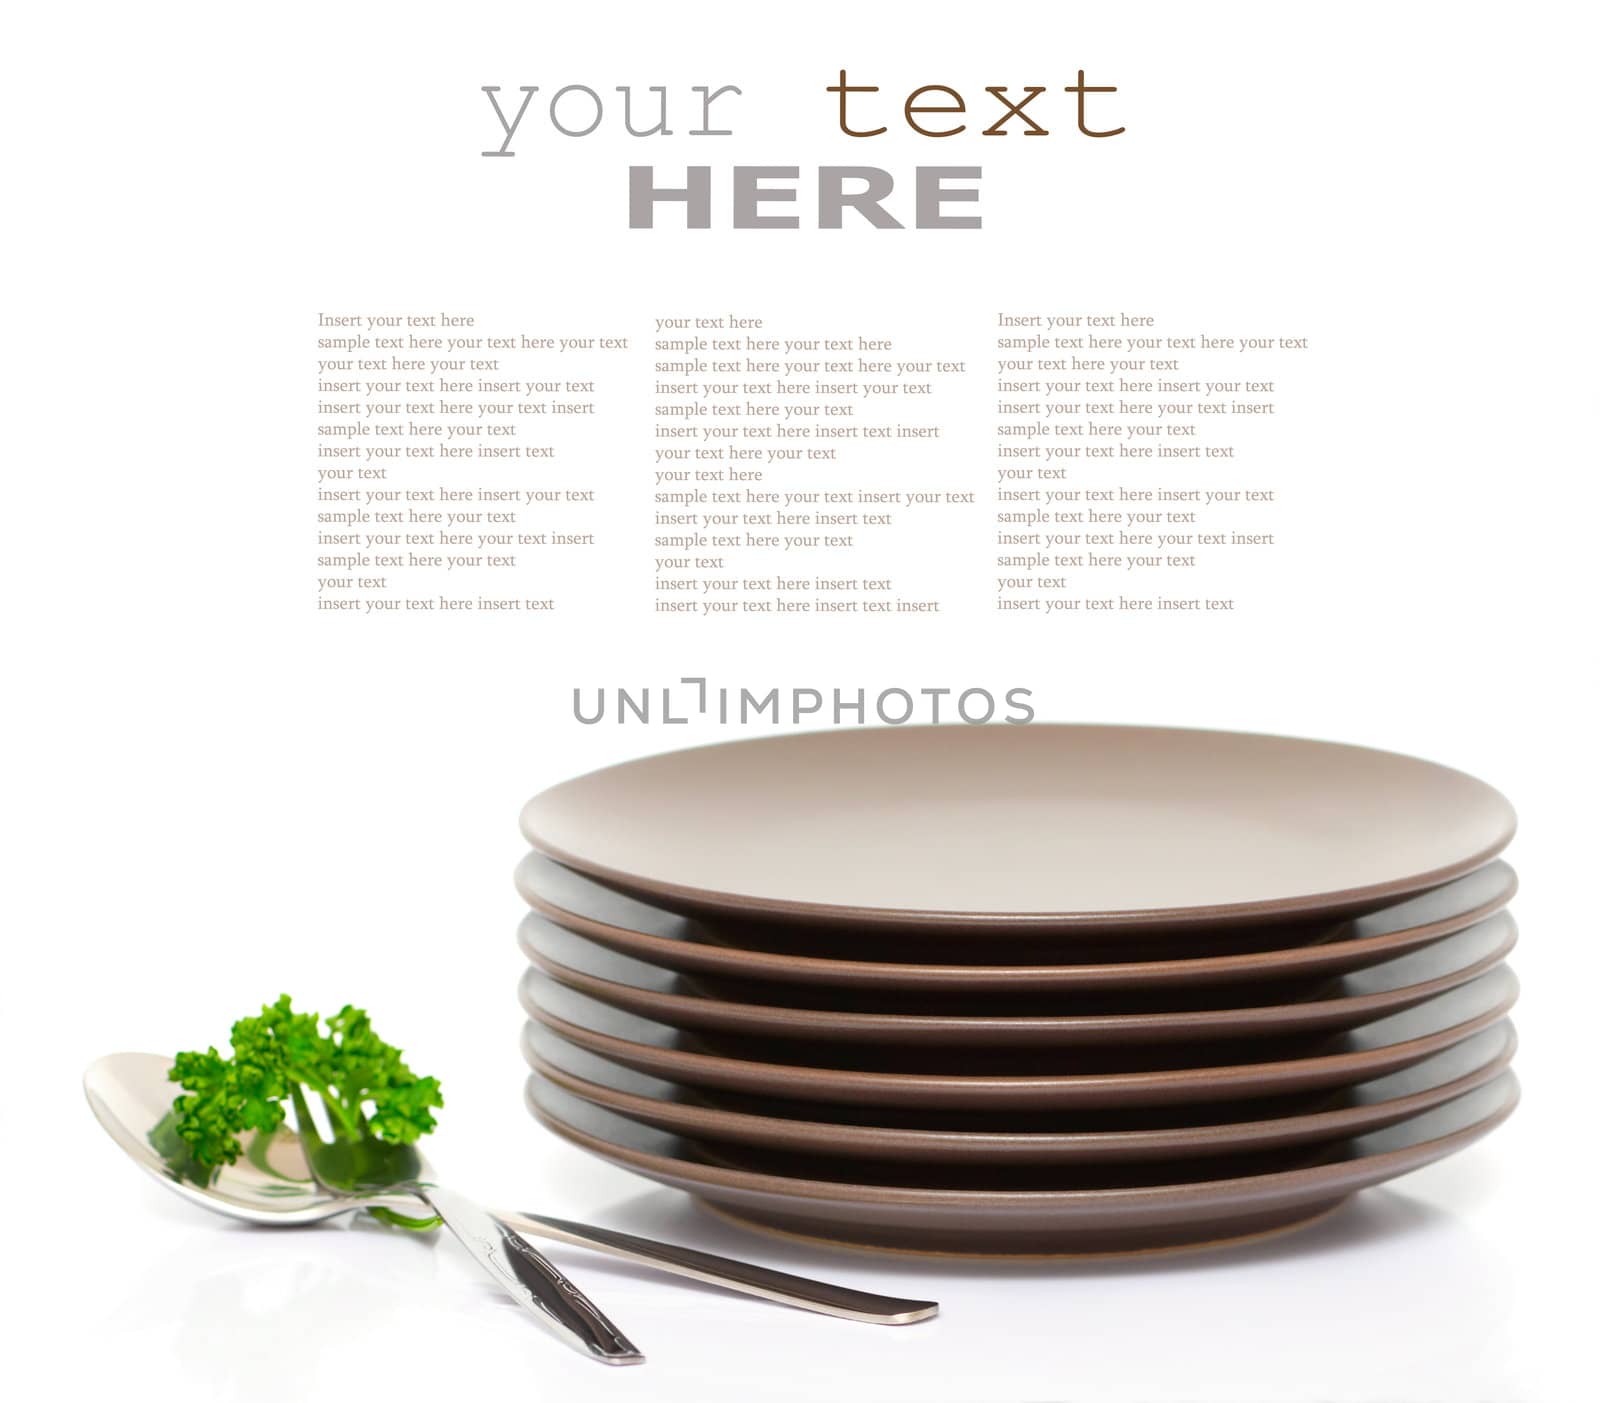 Plates, fork, spoon and parsley by Olinkau